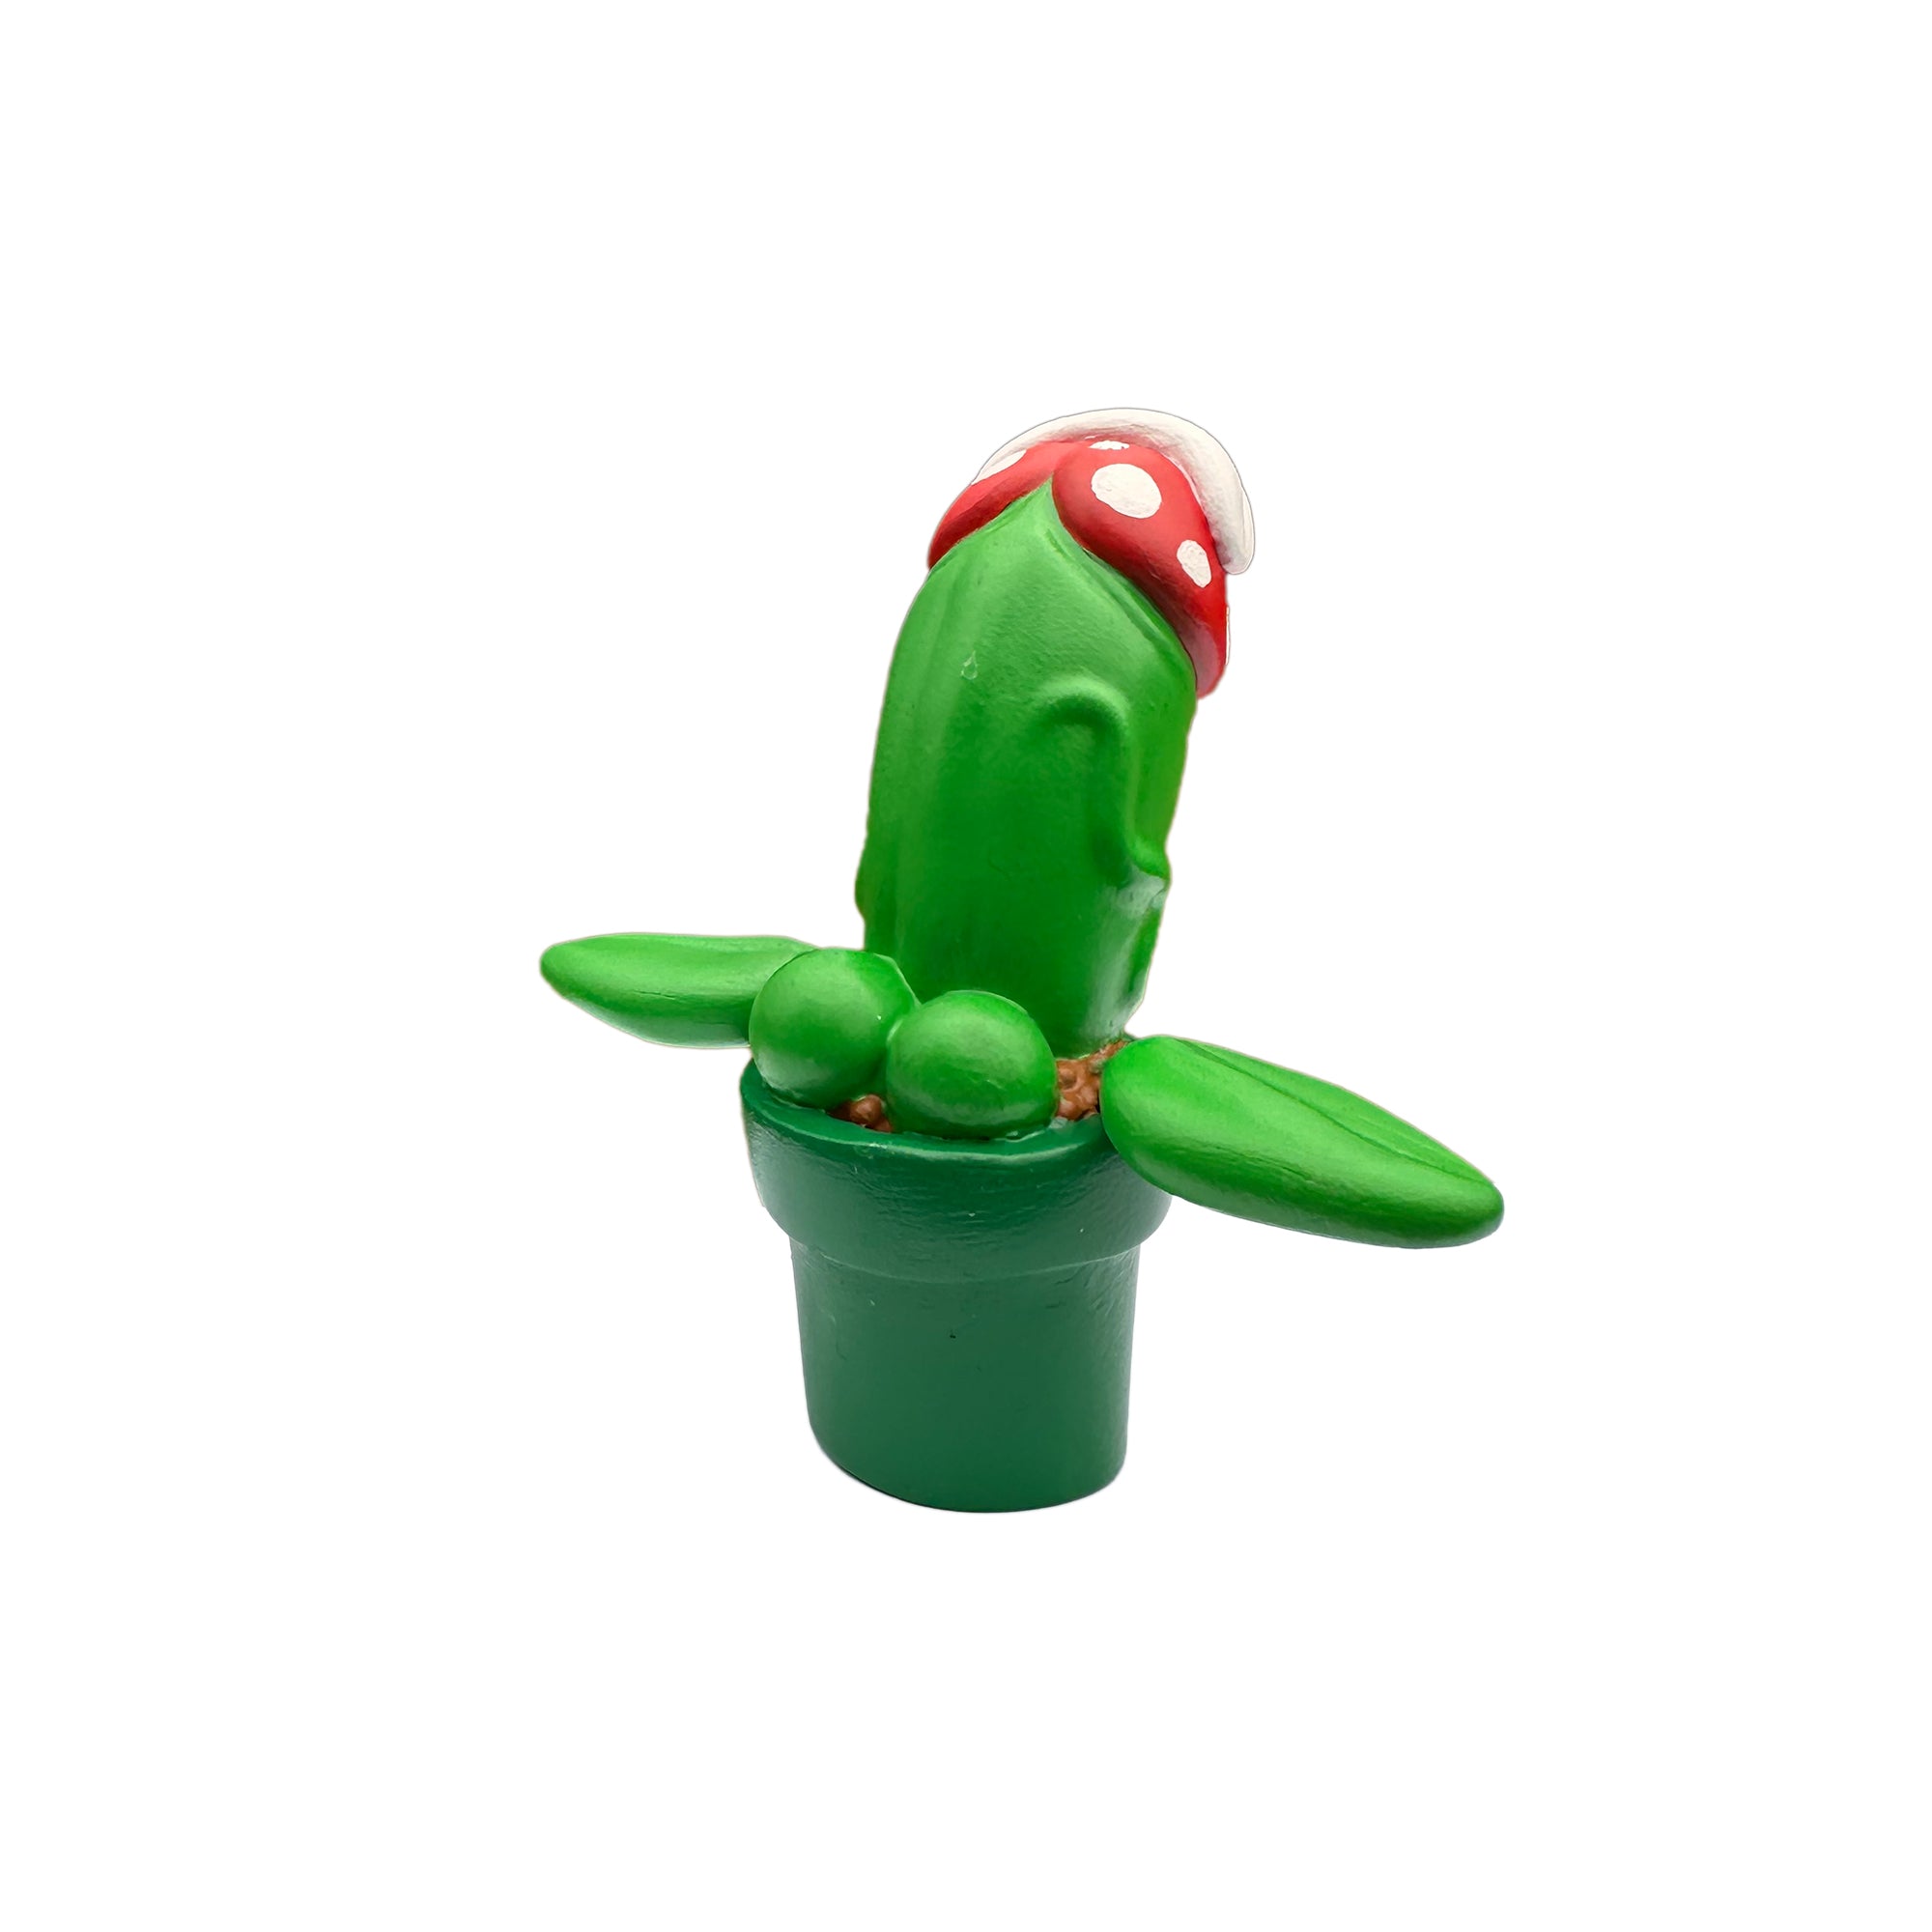 Green cactus in a pot, close-up of a mushroom, and a toy with a red hat by Simon Says Macy & Friends - Piranha Pecker.